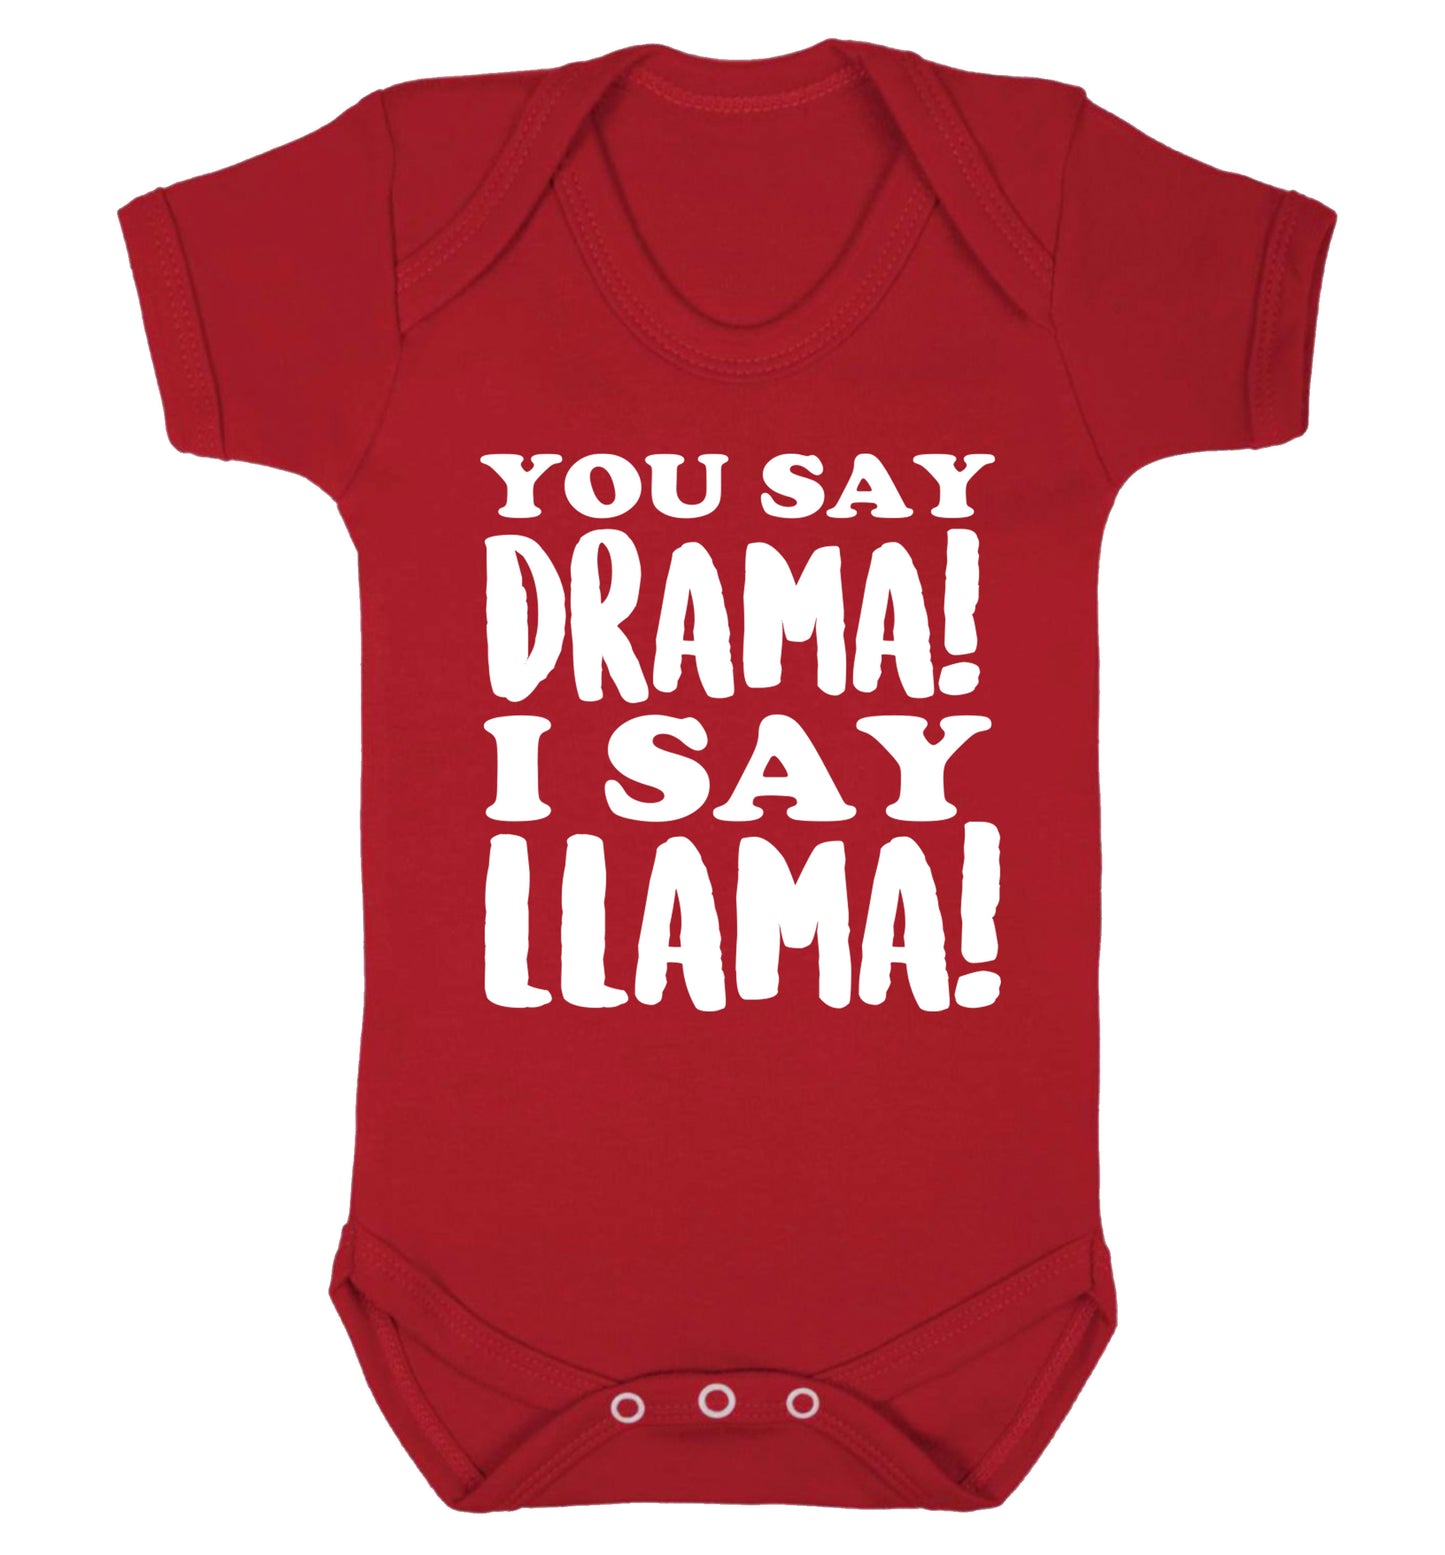 You say drama I say llama! Baby Vest red 18-24 months